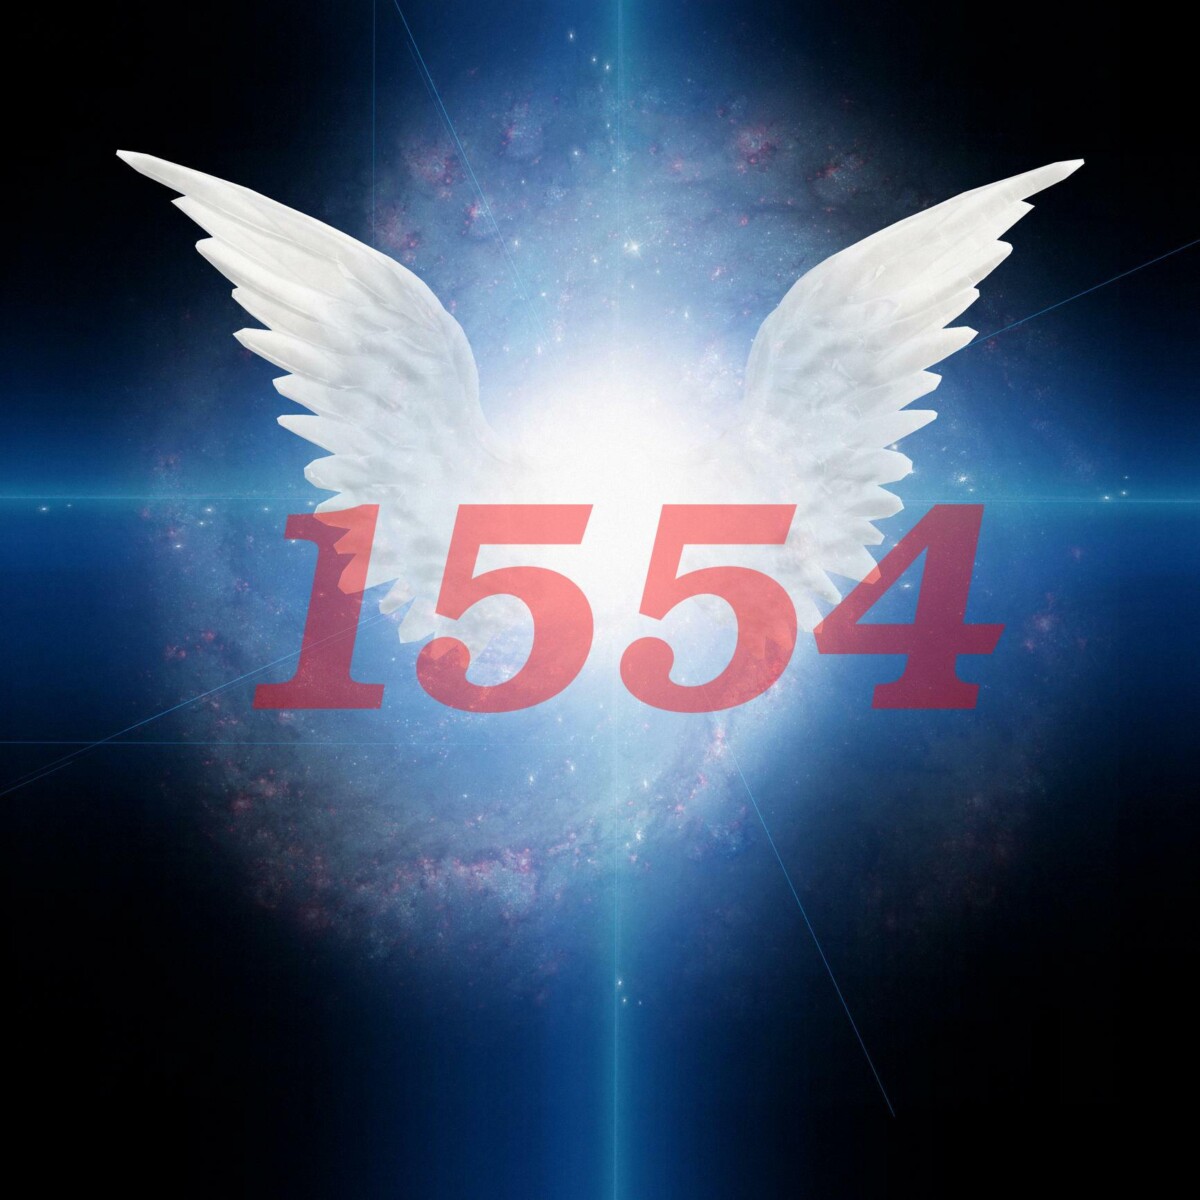 Angel Number 1554 Numerology Meaning